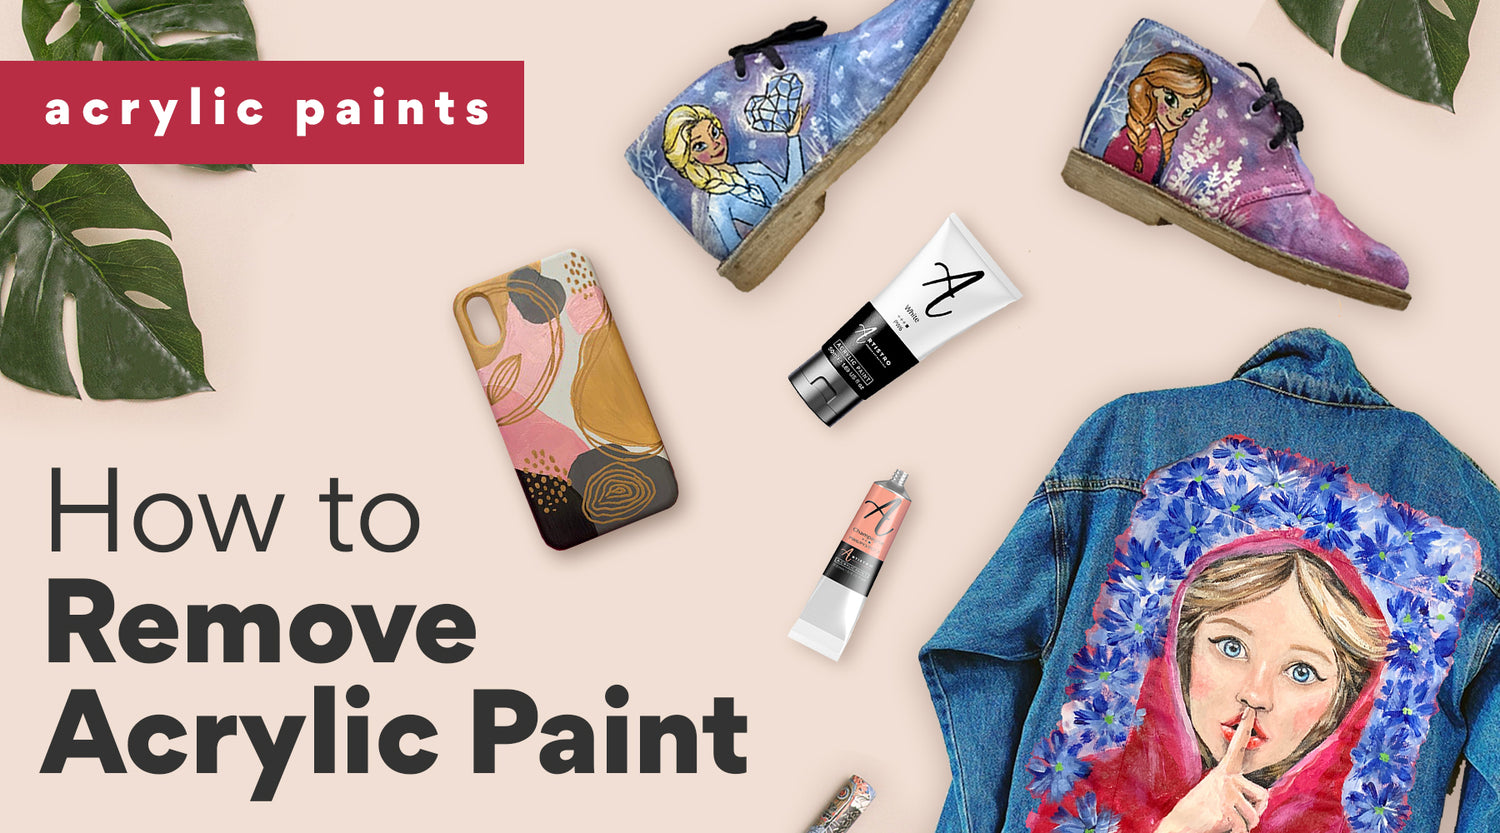 How to Thin Acrylic Paint: 5 Easy & Effective Techniques